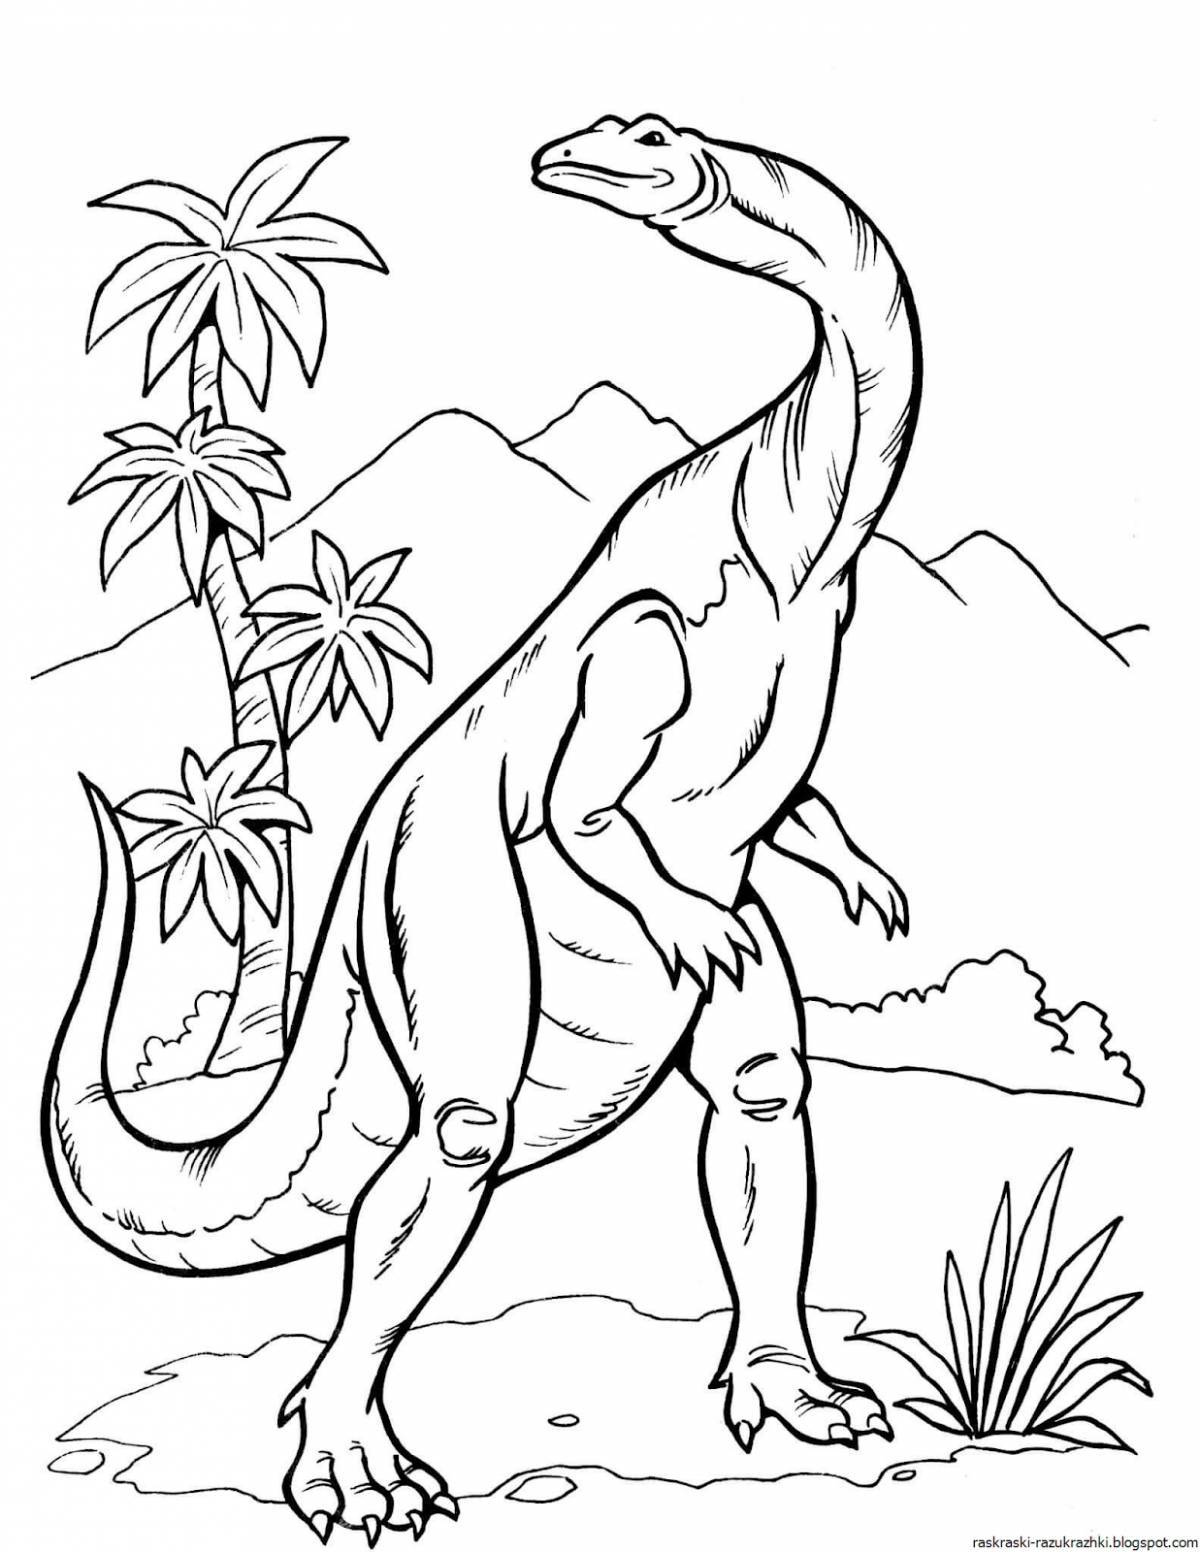 Colourful dinosaurs coloring pages for boys